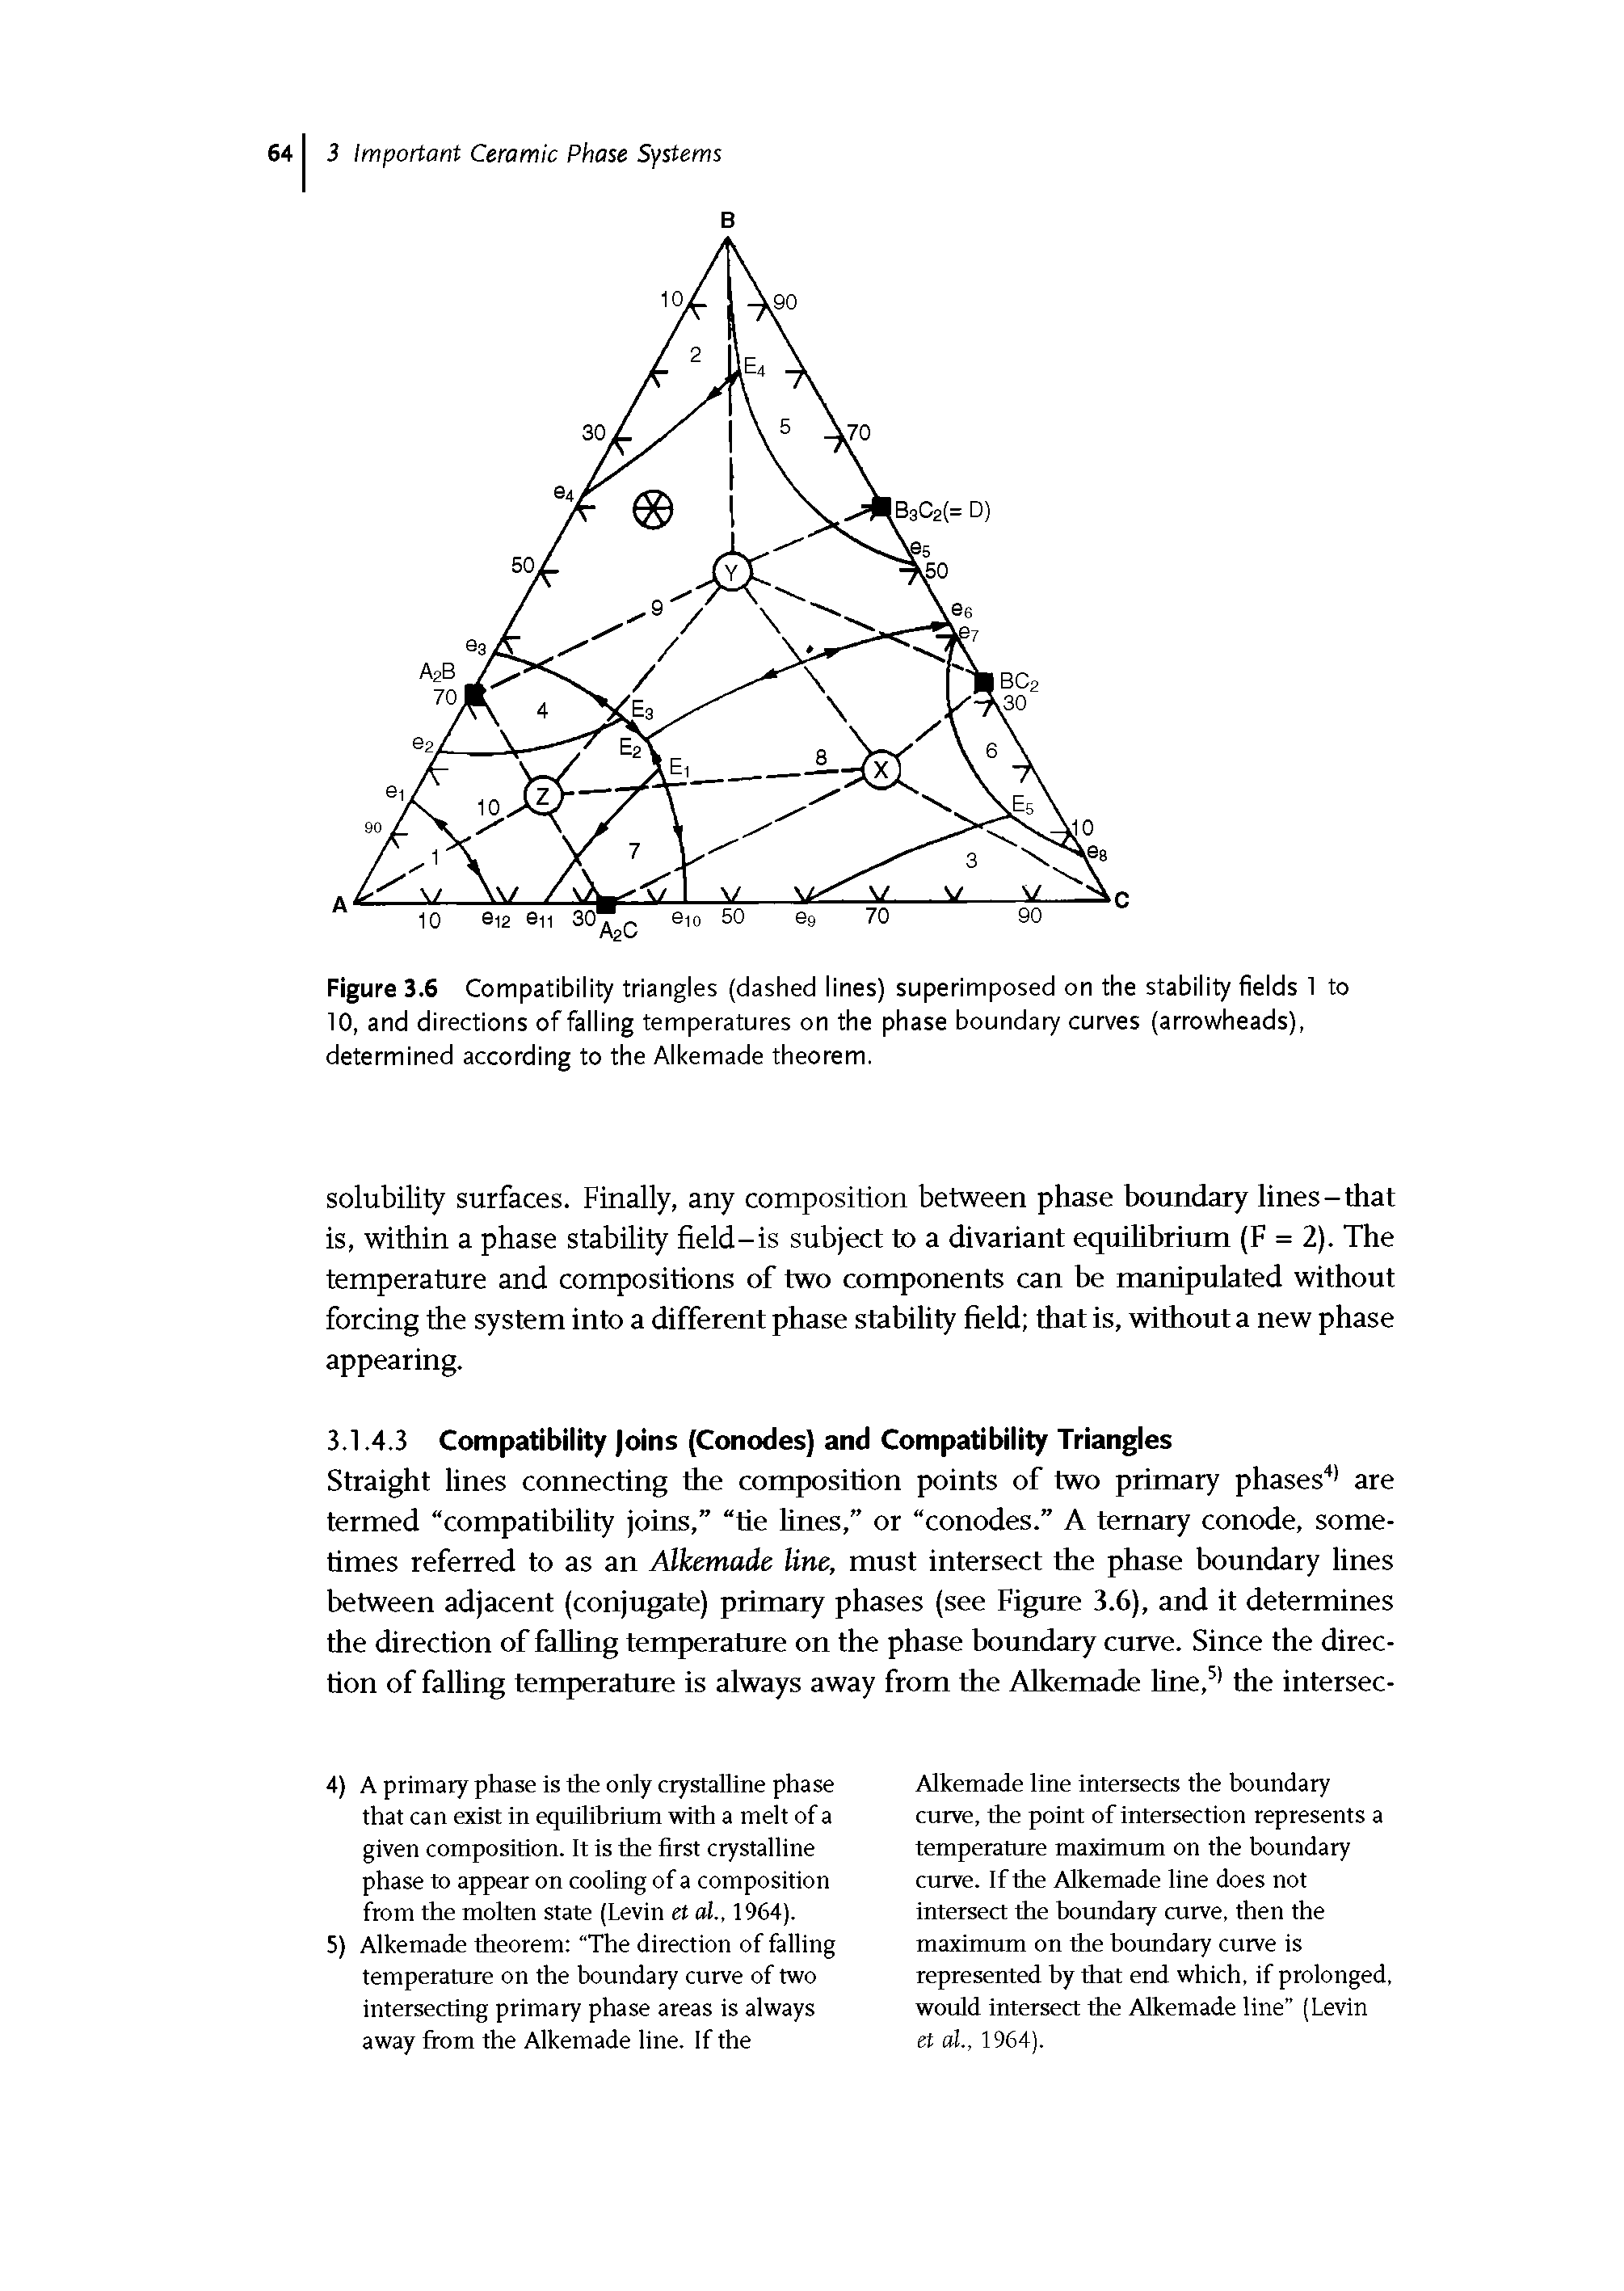 Figure 3.6 Compatibility triangles (dashed lines) superimposed on the stability fields 1 to 10, and directions of falling temperatures on the phase boundary curves (arrowheads), determined according to the Alkemade theorem.